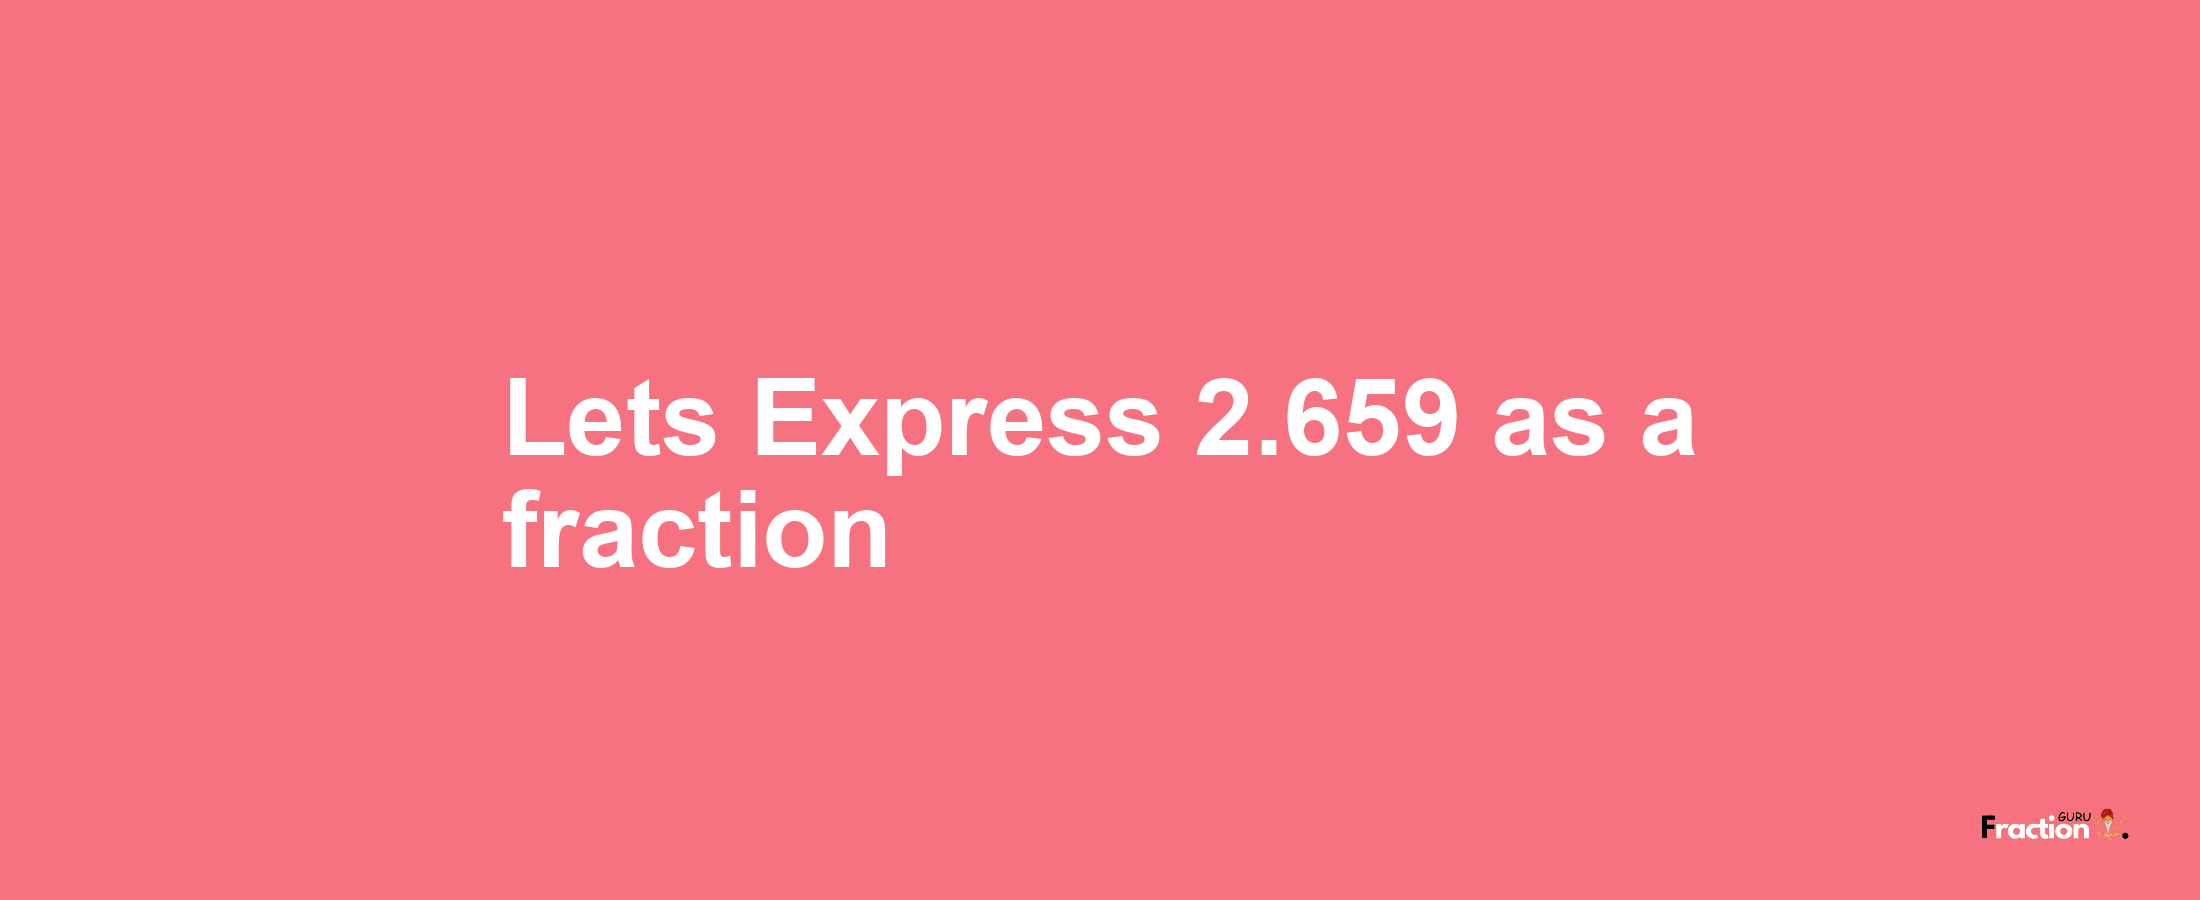 Lets Express 2.659 as afraction